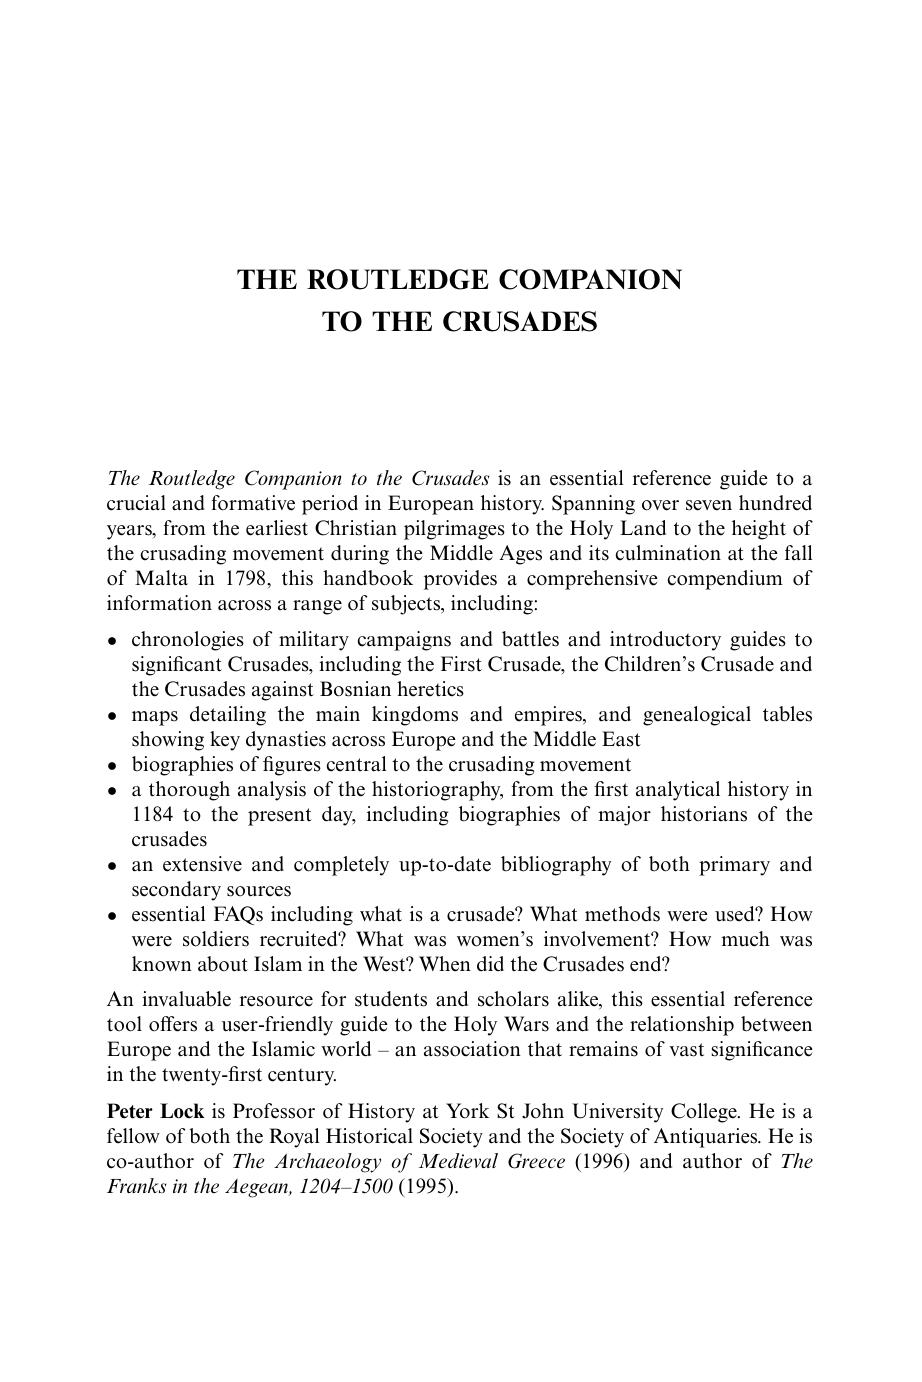 Lock by The Routledge Companion to the Crusades (2006)